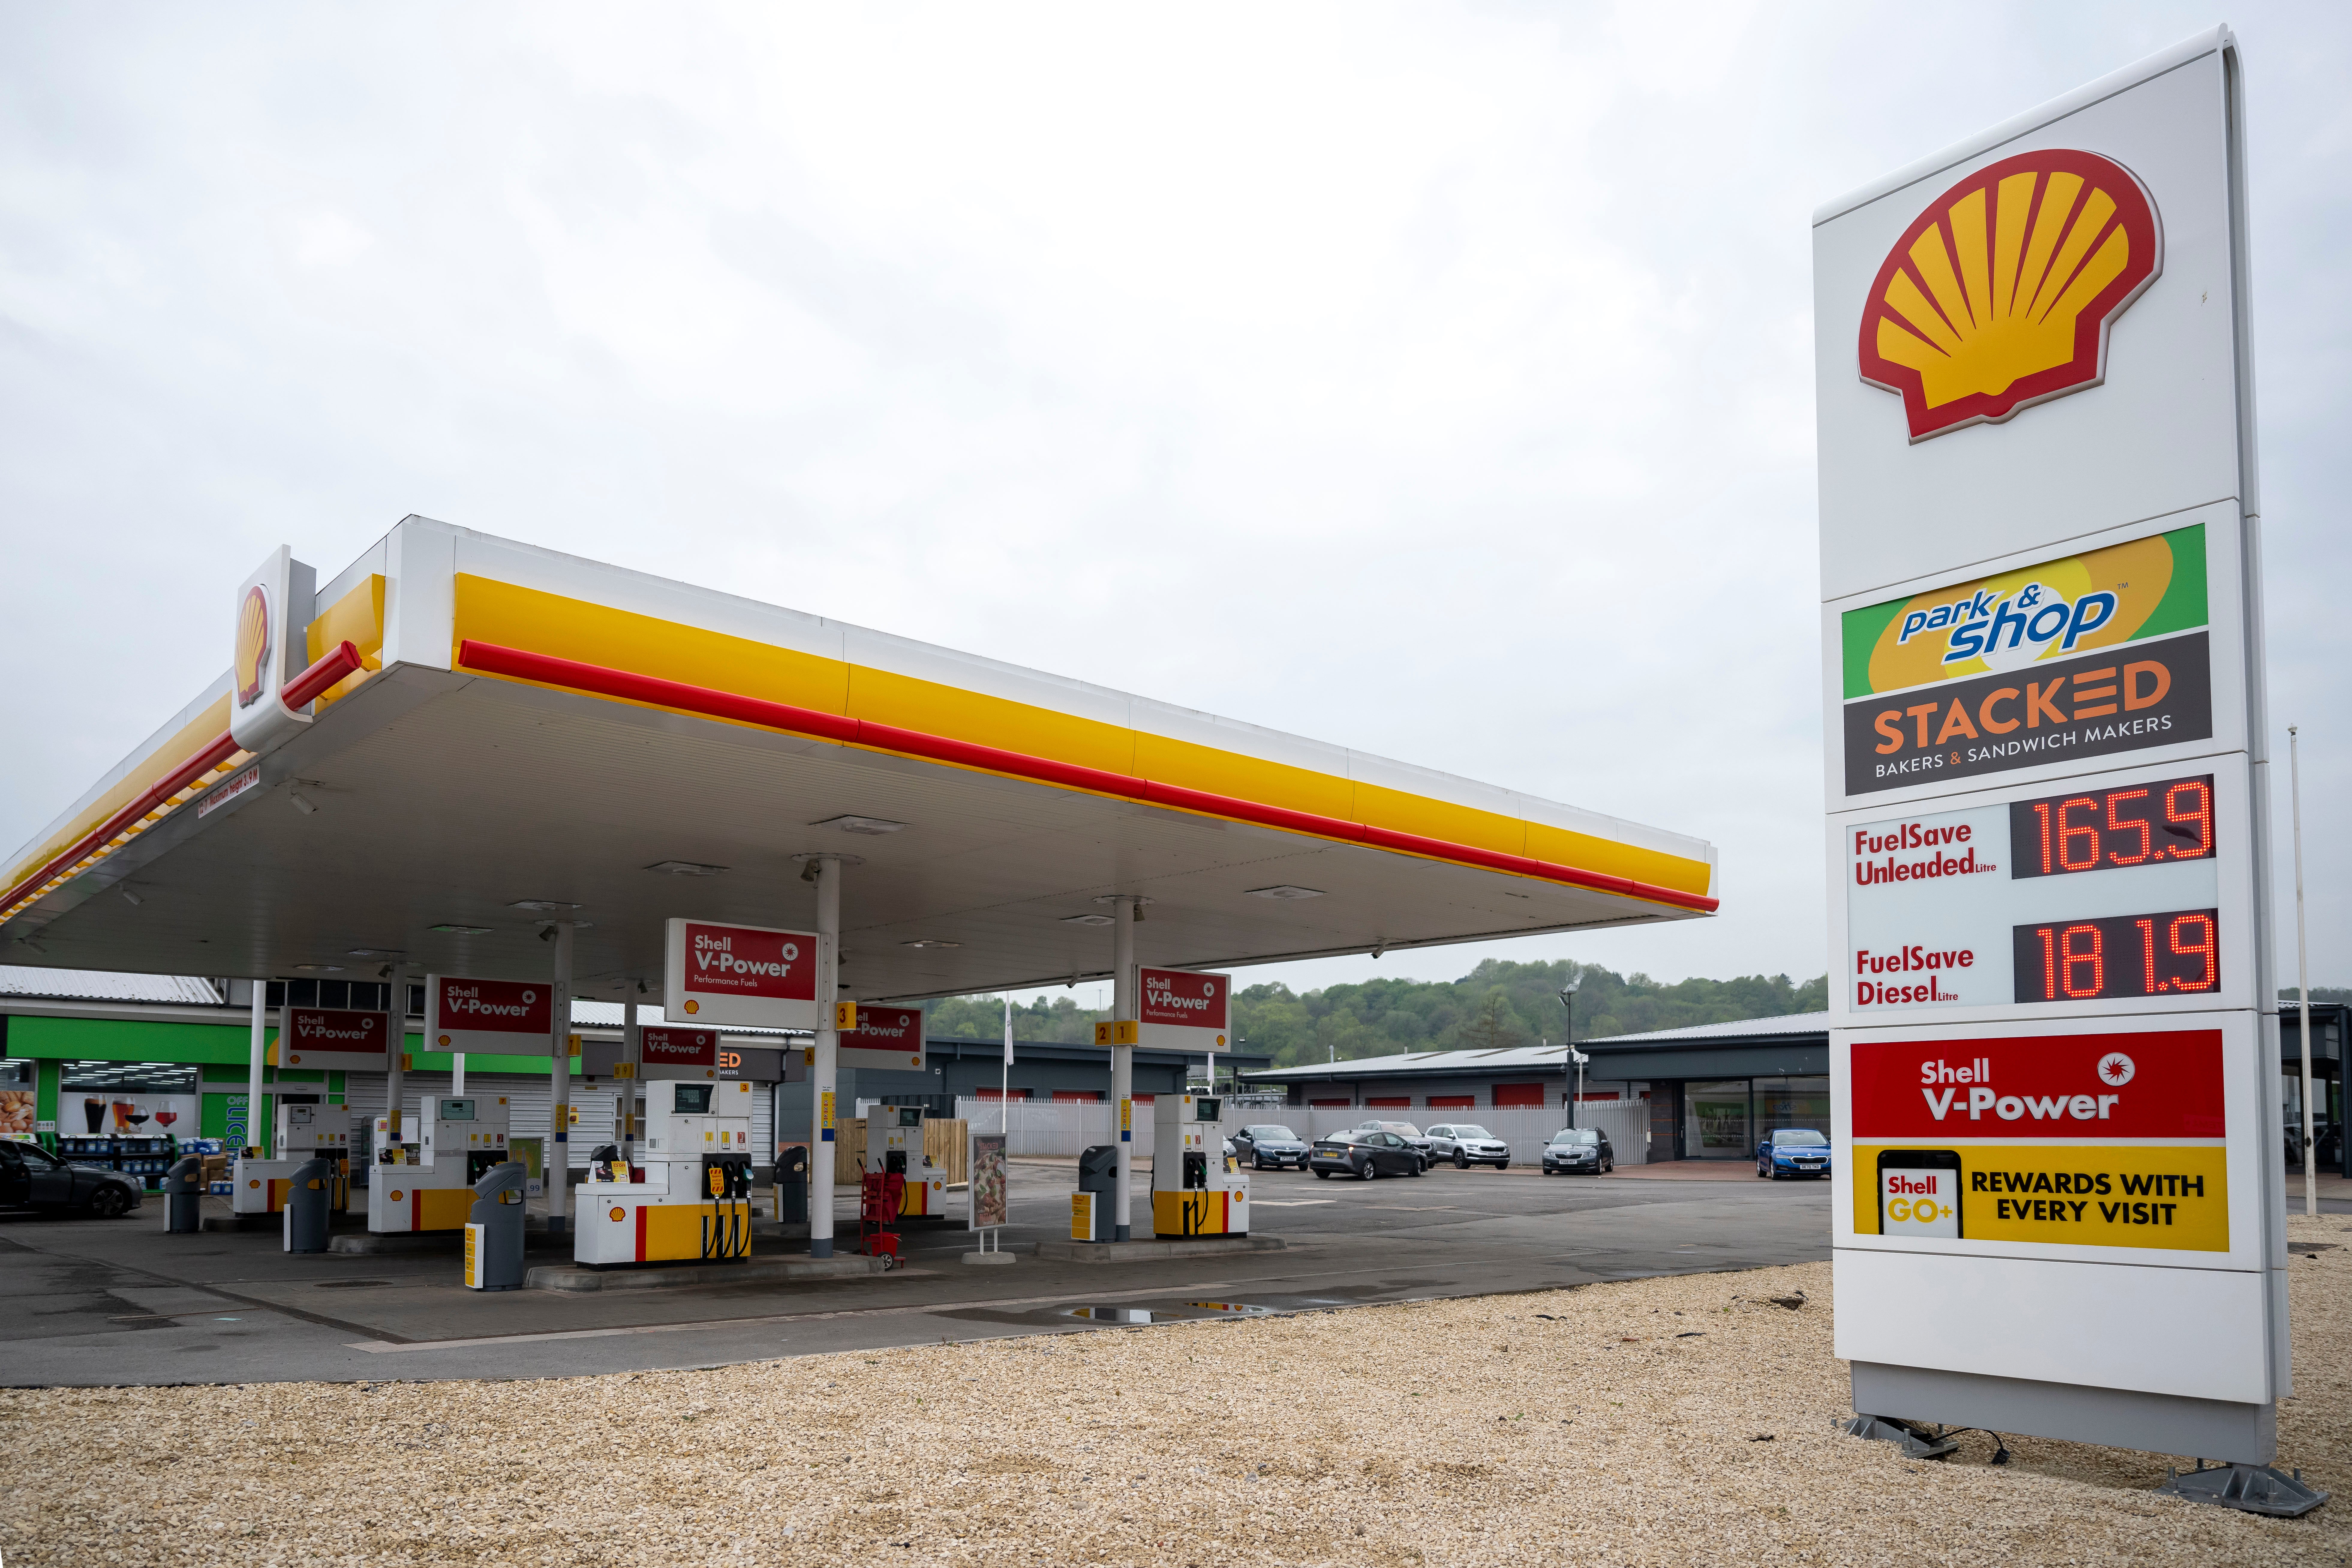 Shell’s earnings rose to $9.1bn in the first quarter of this year